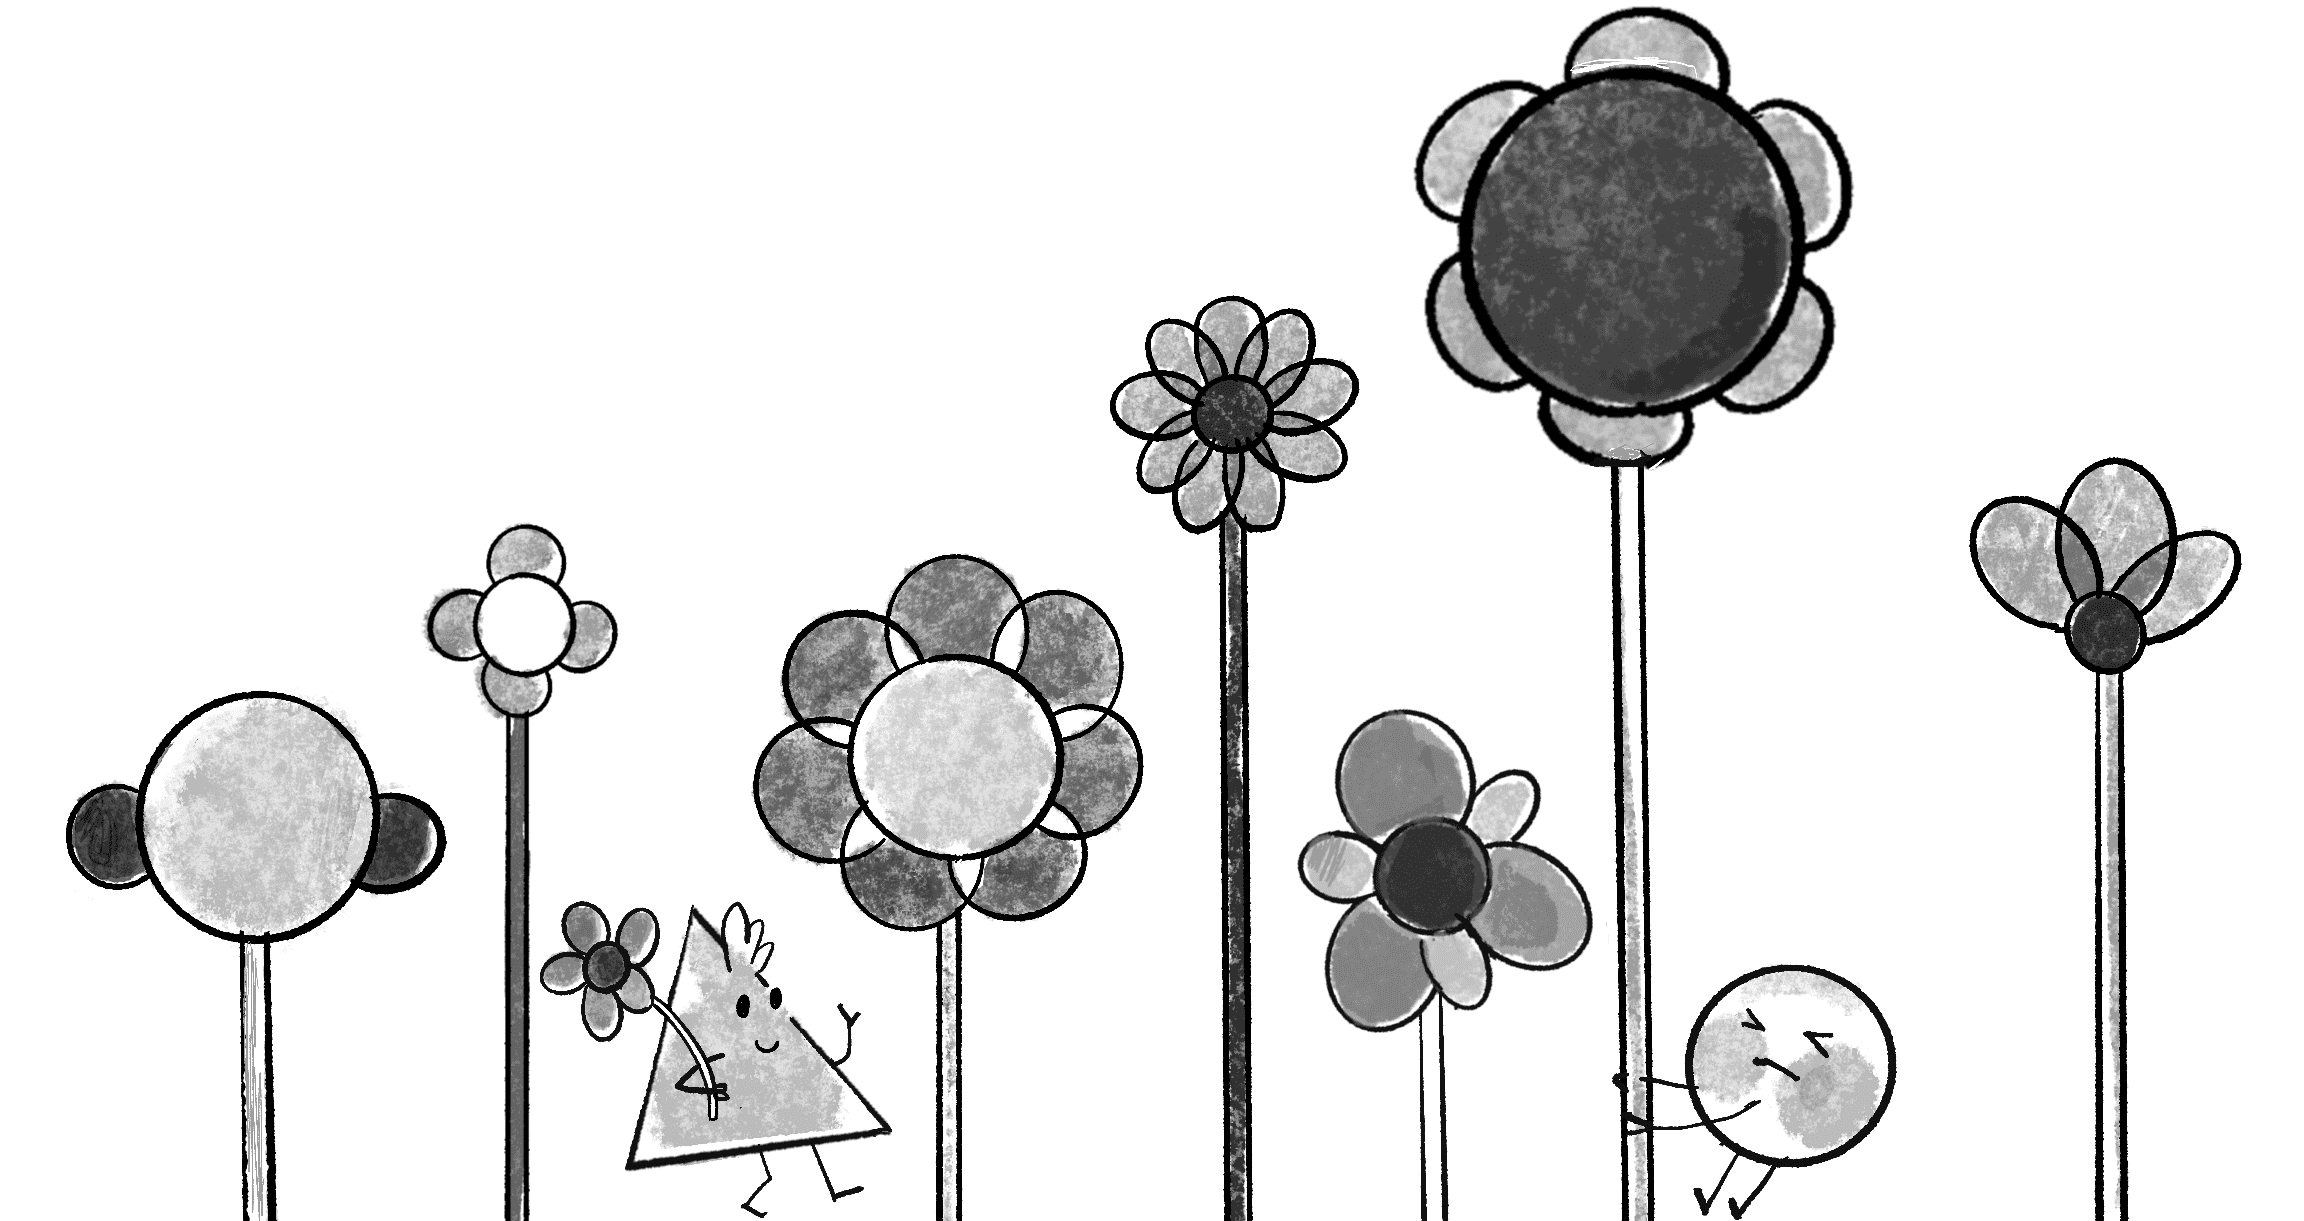 Figure 9.12: Flower design for interactive selection